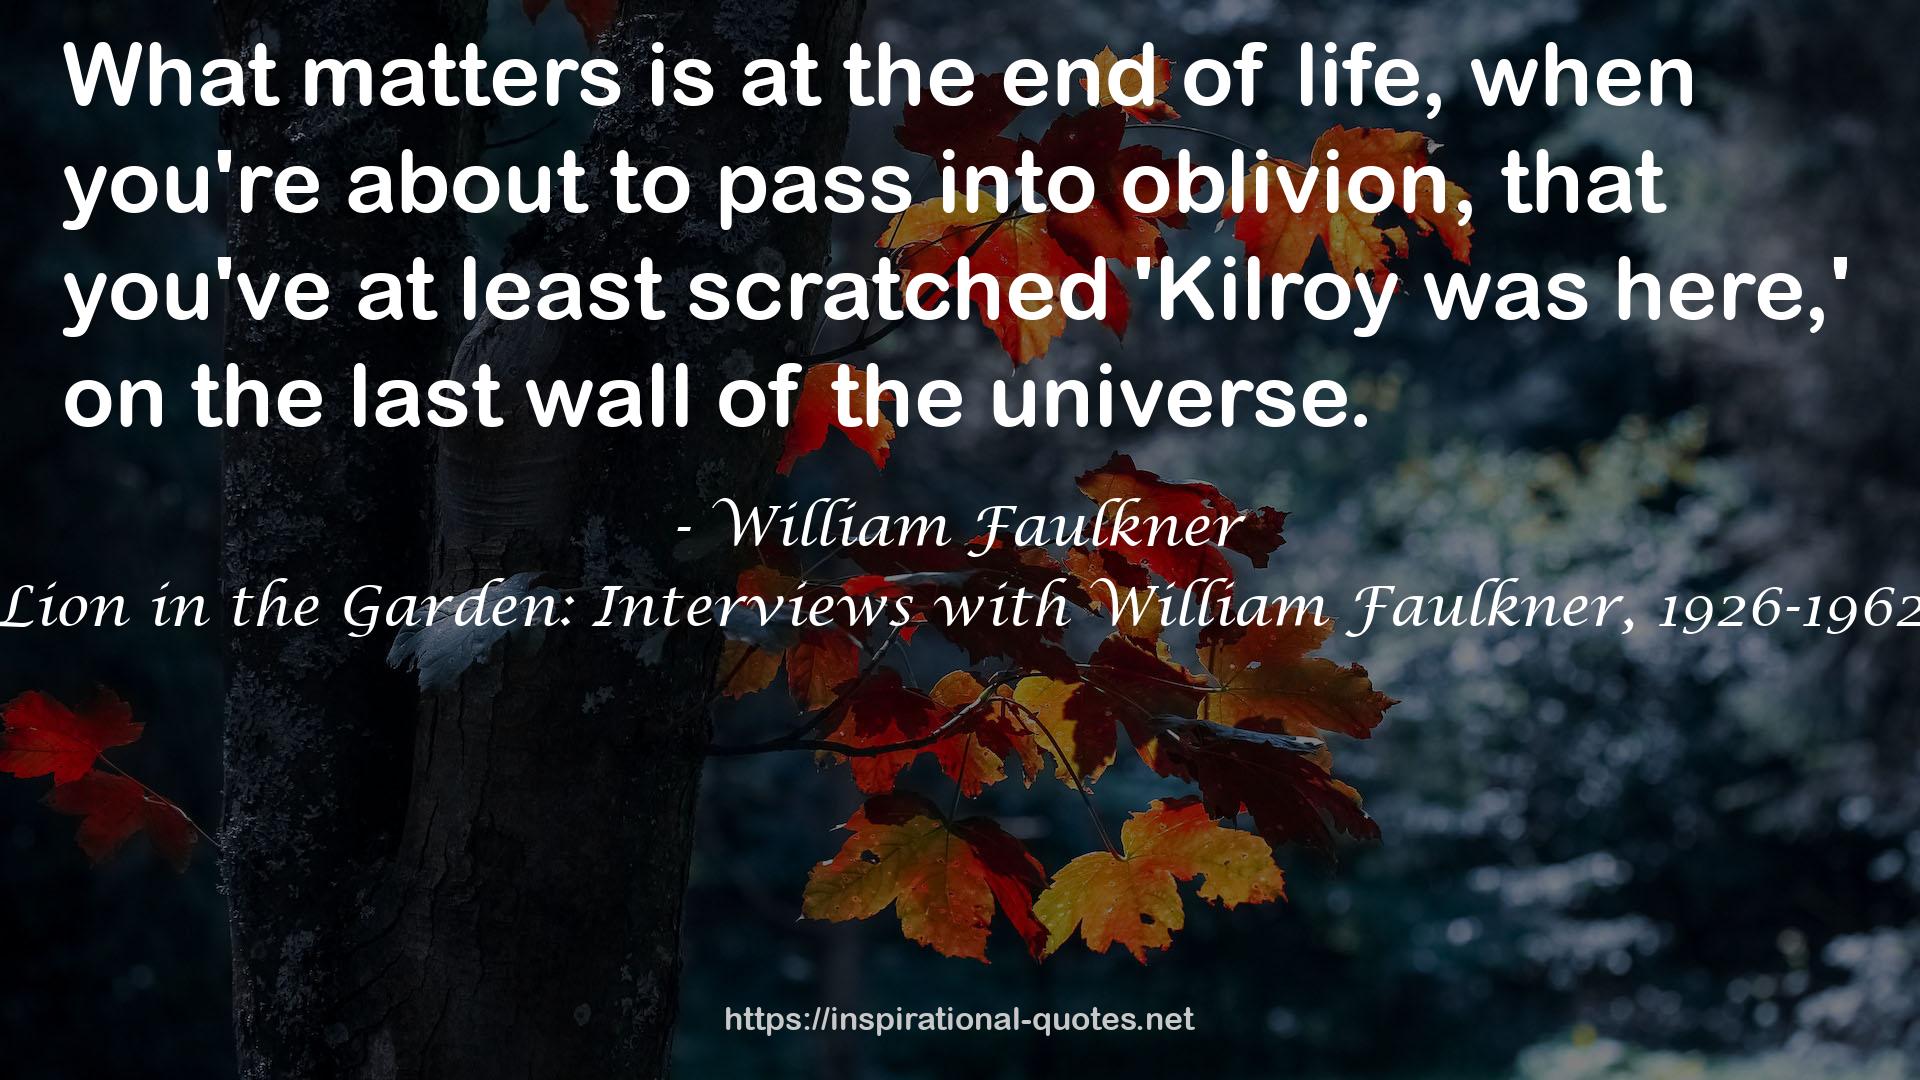 Lion in the Garden: Interviews with William Faulkner, 1926-1962 QUOTES